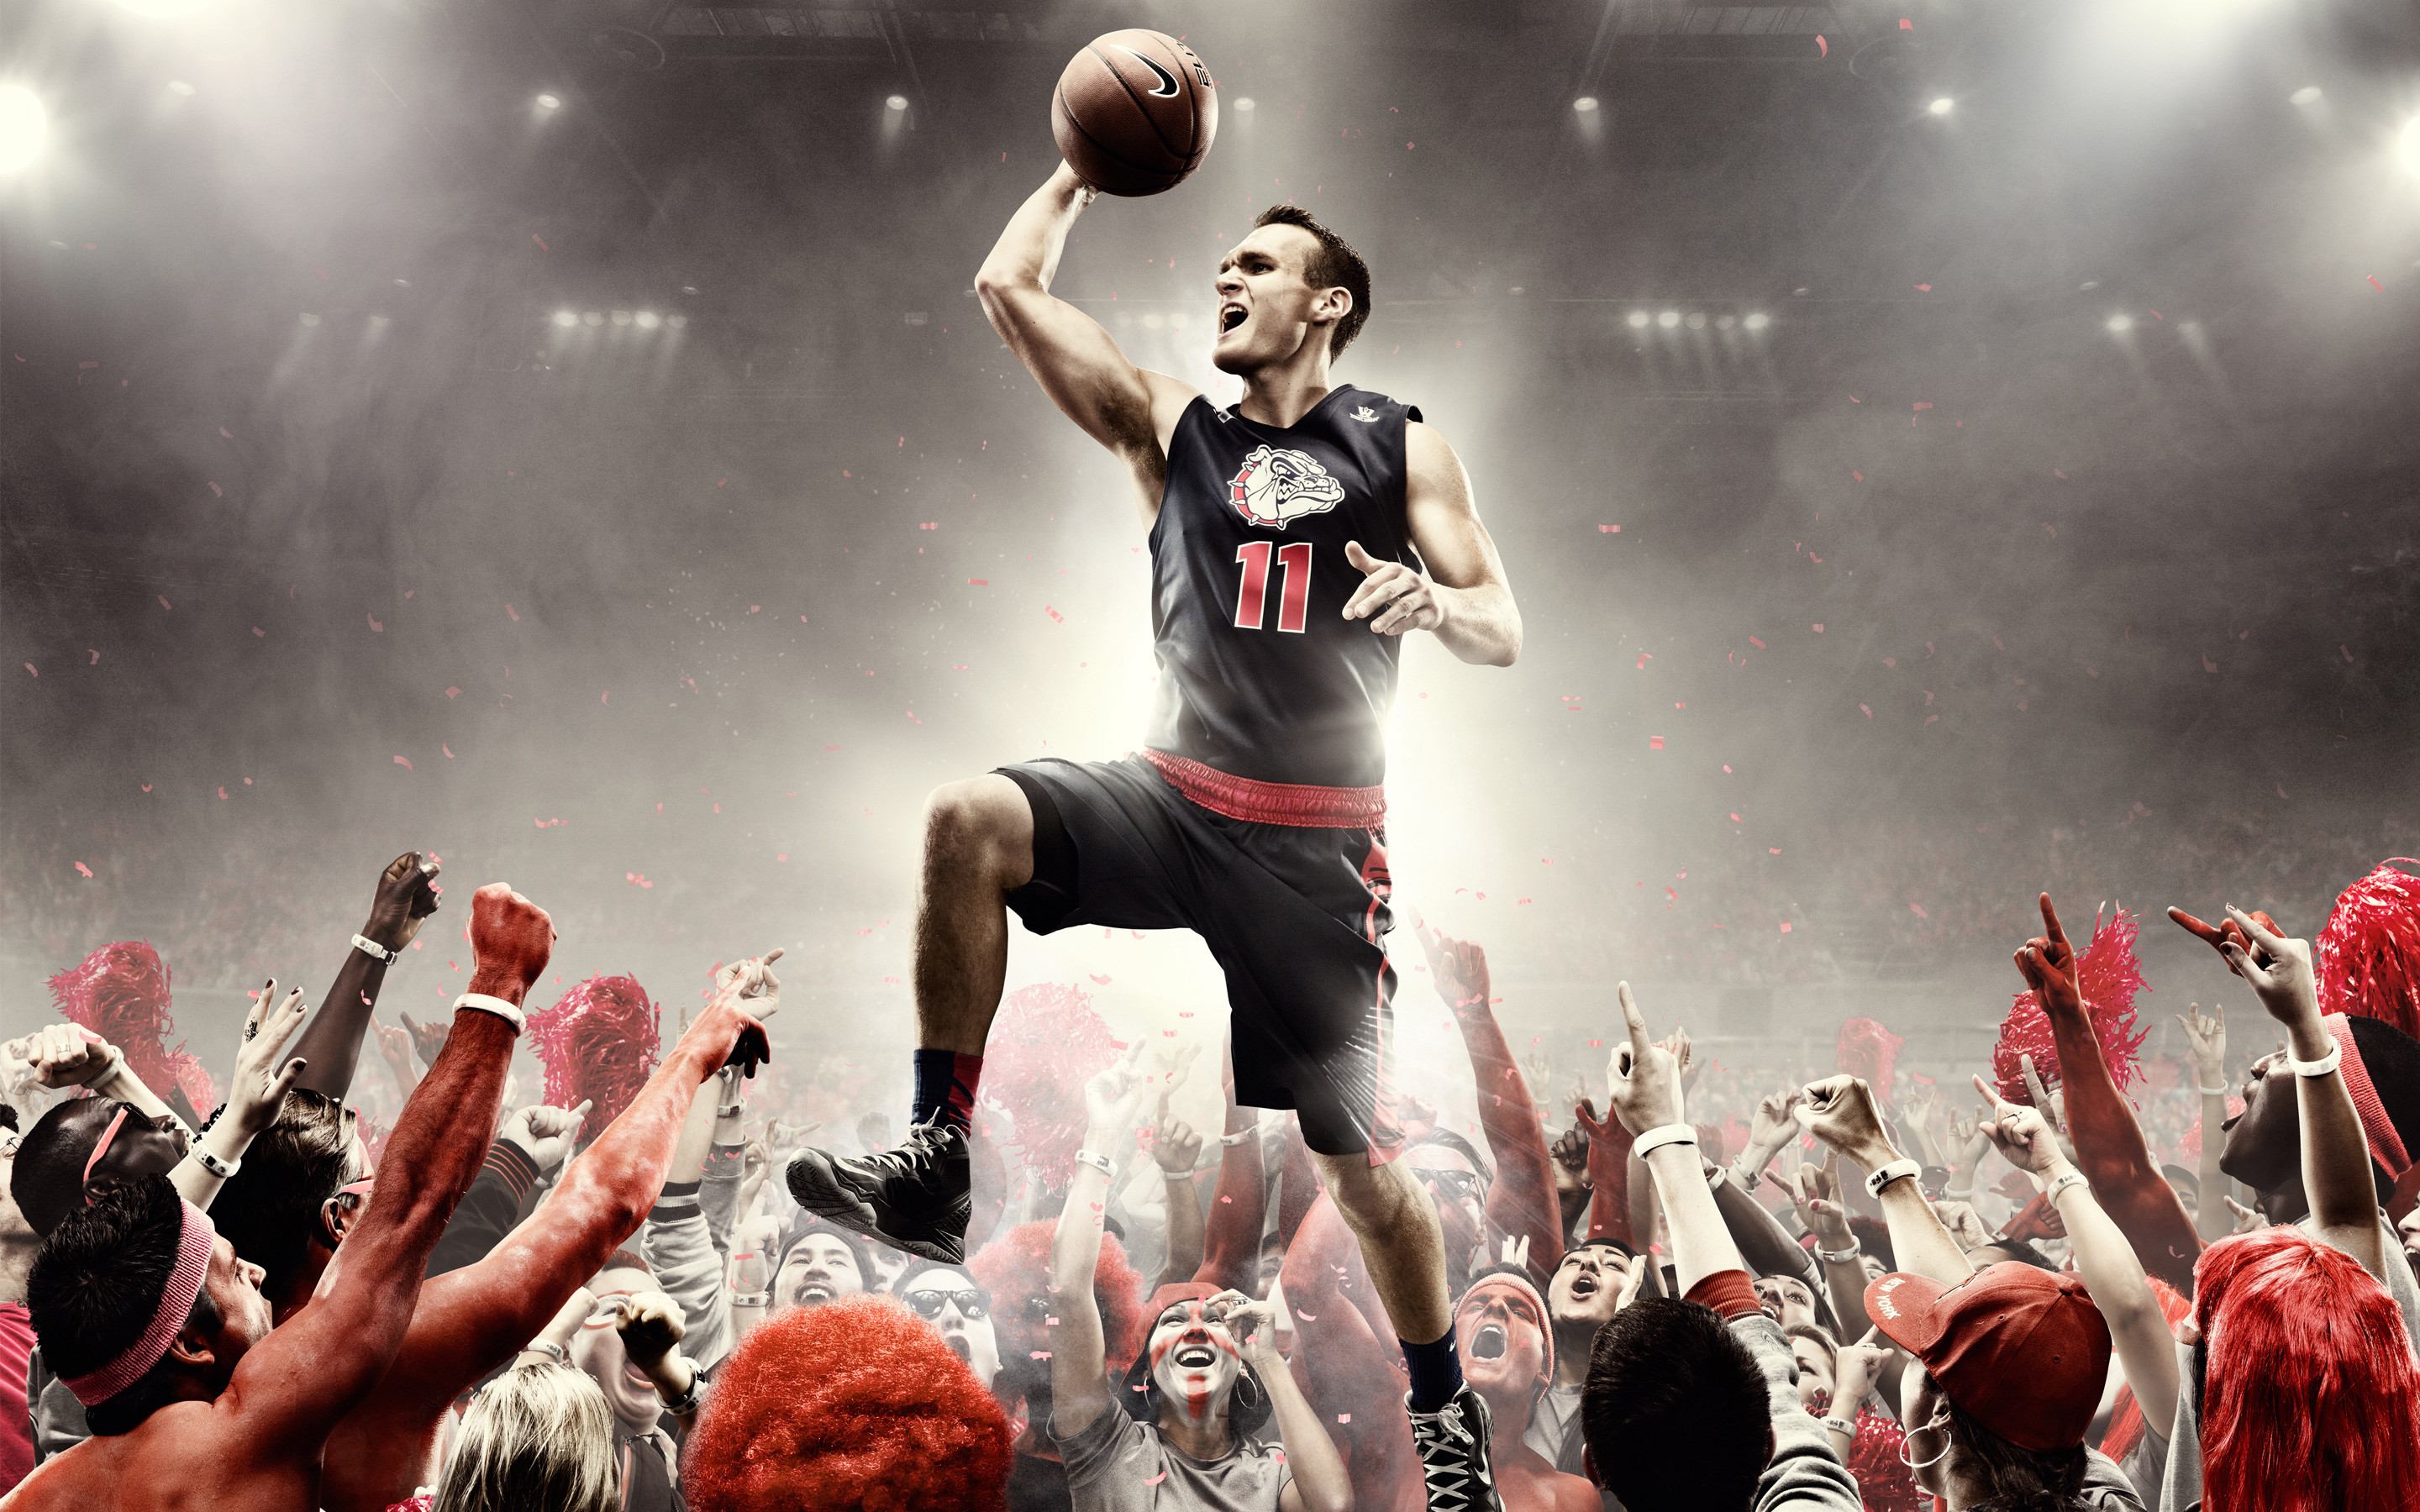 2880x1800 ... Basketball wallpaper - Android Apps on Google Play ...